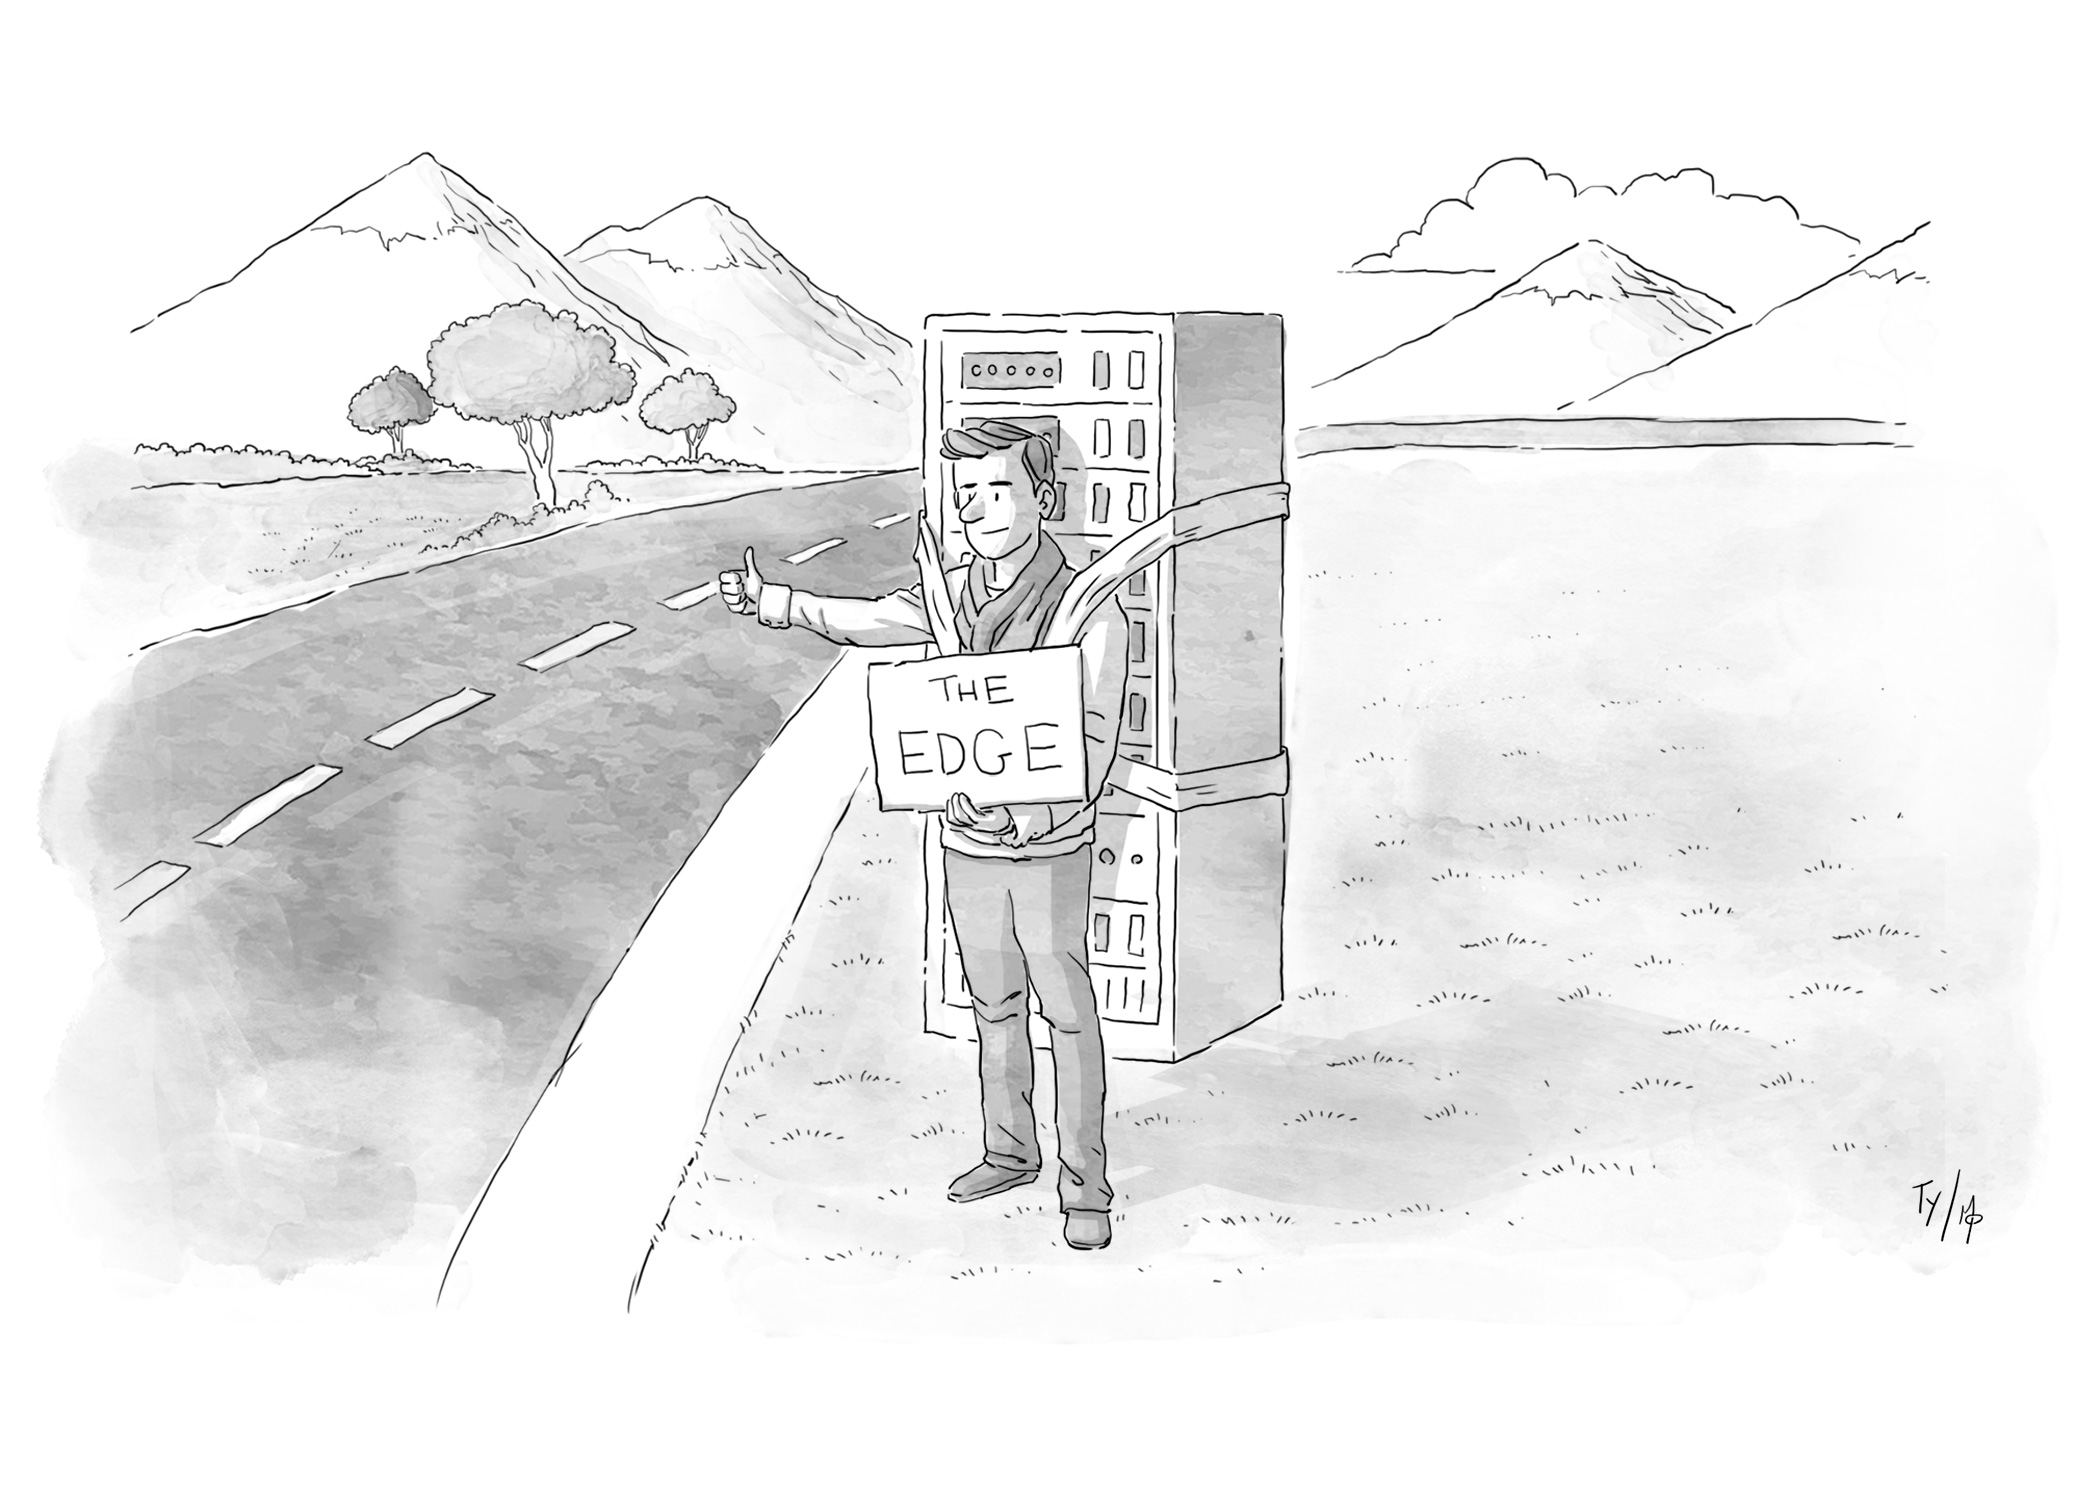 New Yorker style illustration. A man hitch-hiking near a road, with a server block strapped to his back. He has a sign the reads The Edge.